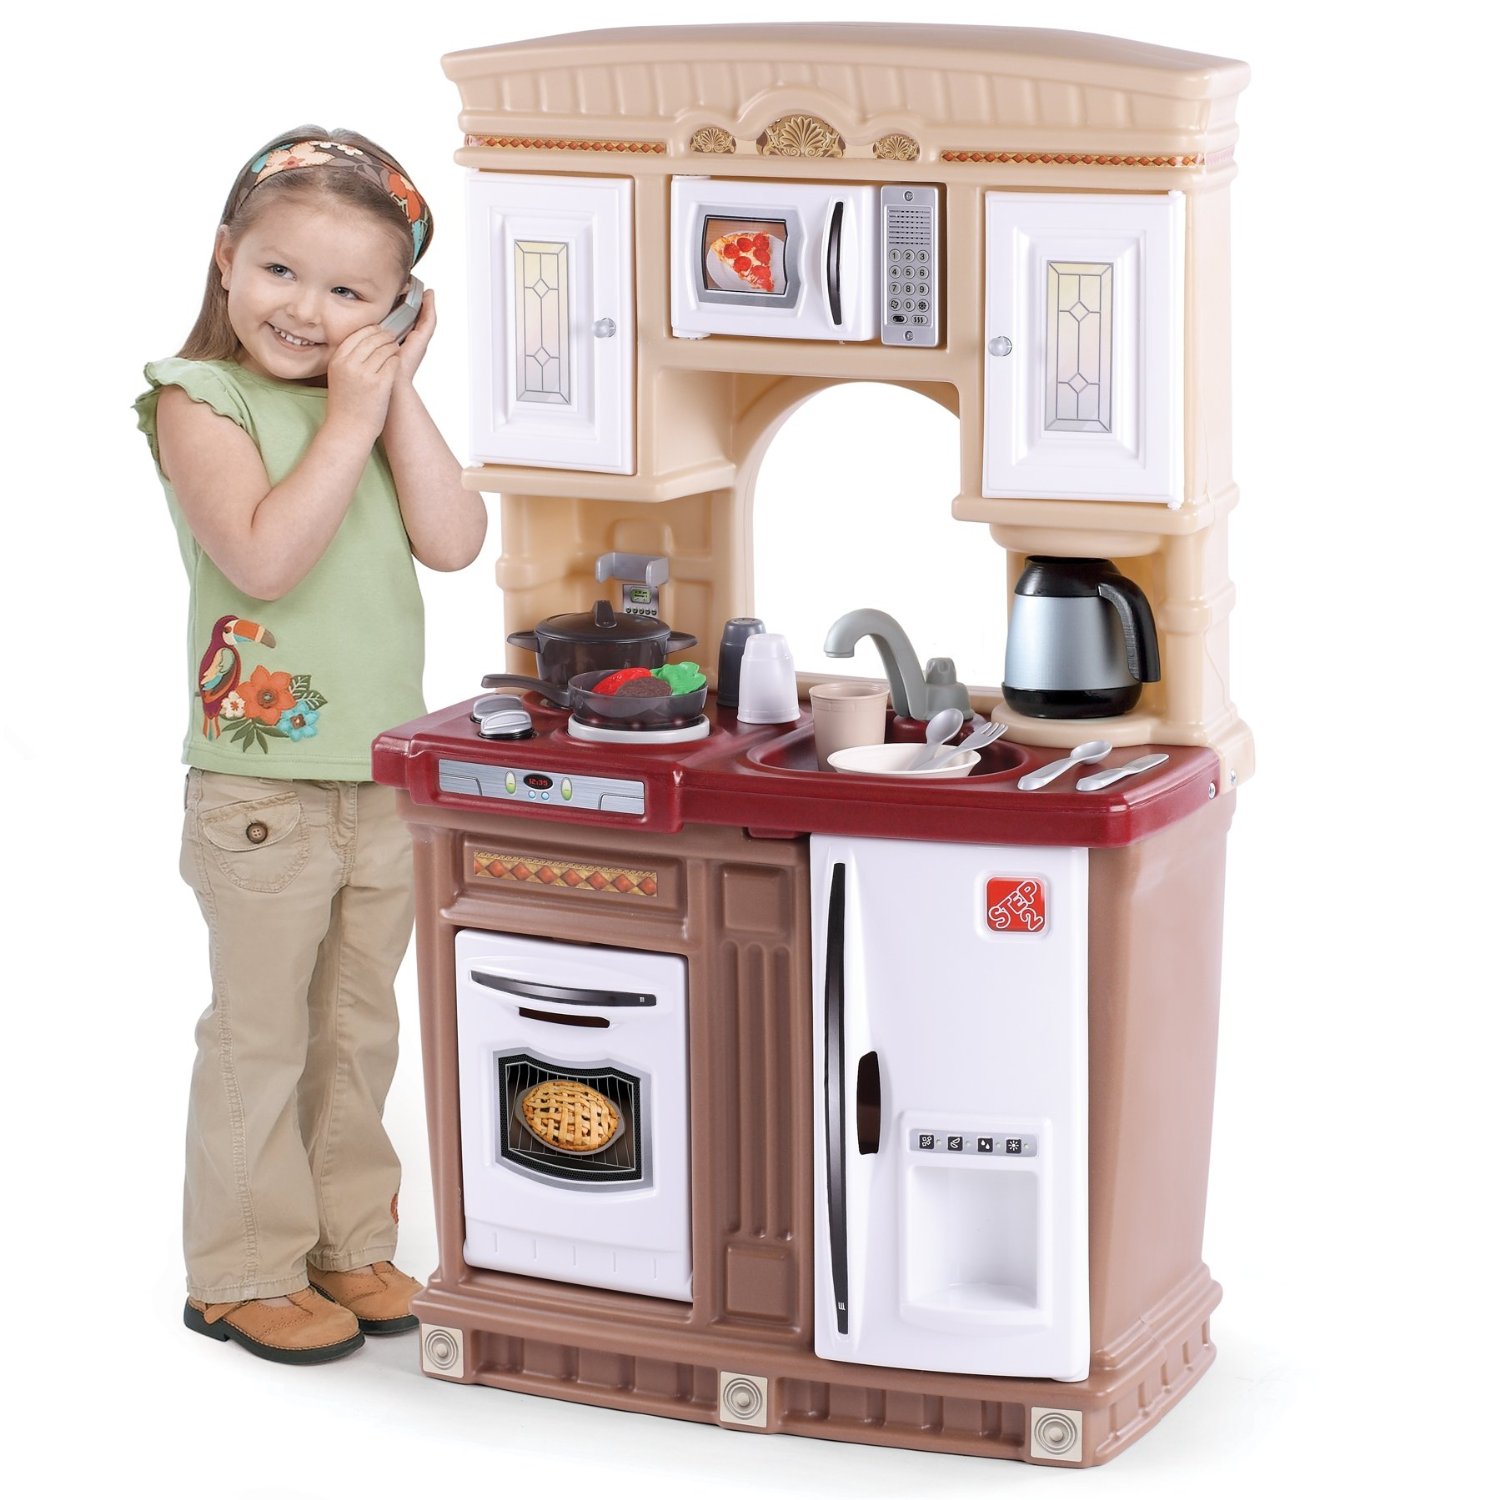 Top 10 Best Play Kitchen Sets for 2017 – Top Value Reviews